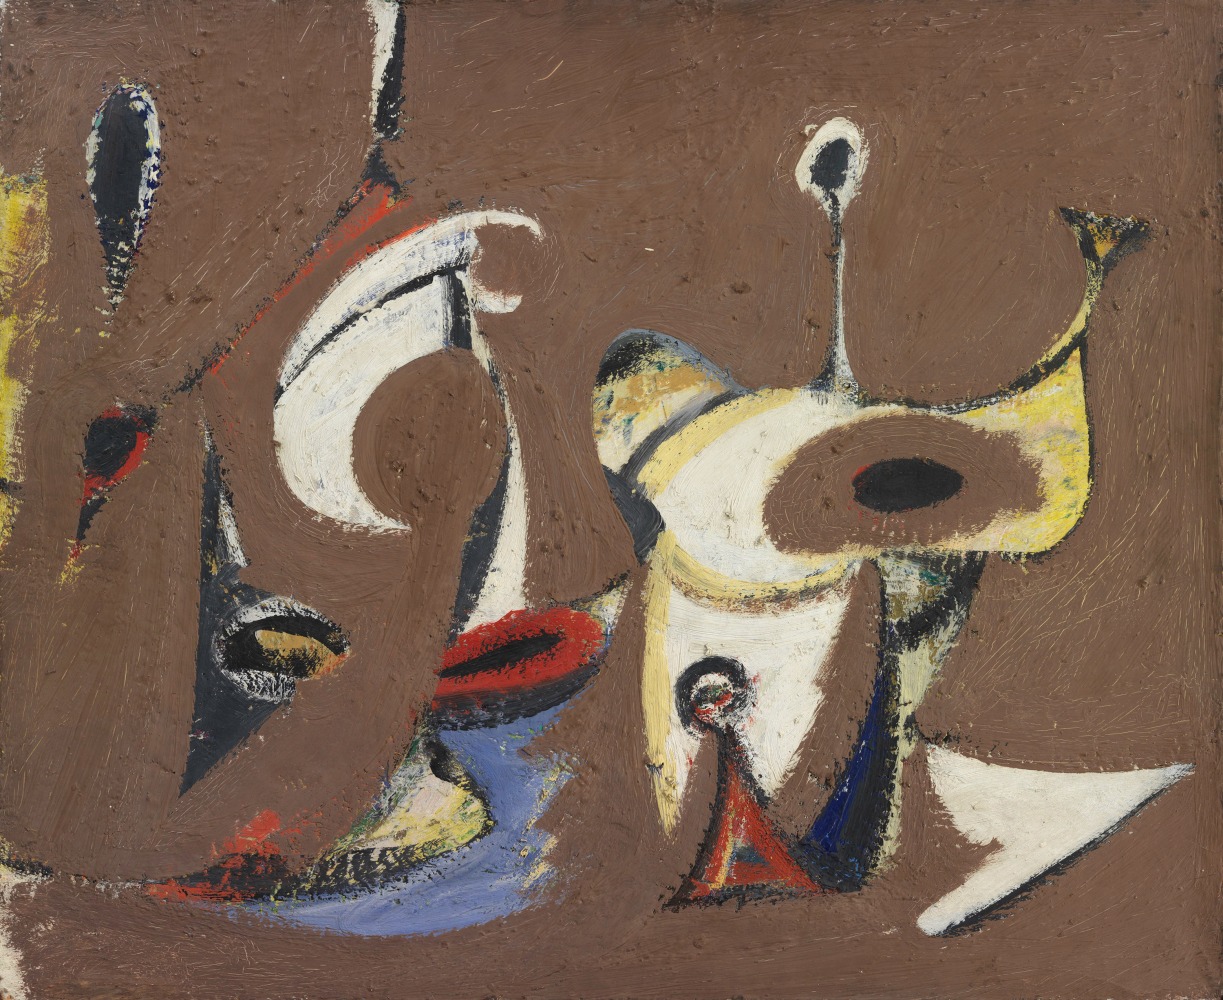 Abstract composition with predominately yellow and white arabesque motifs on a brown background rendered in thick oil paint